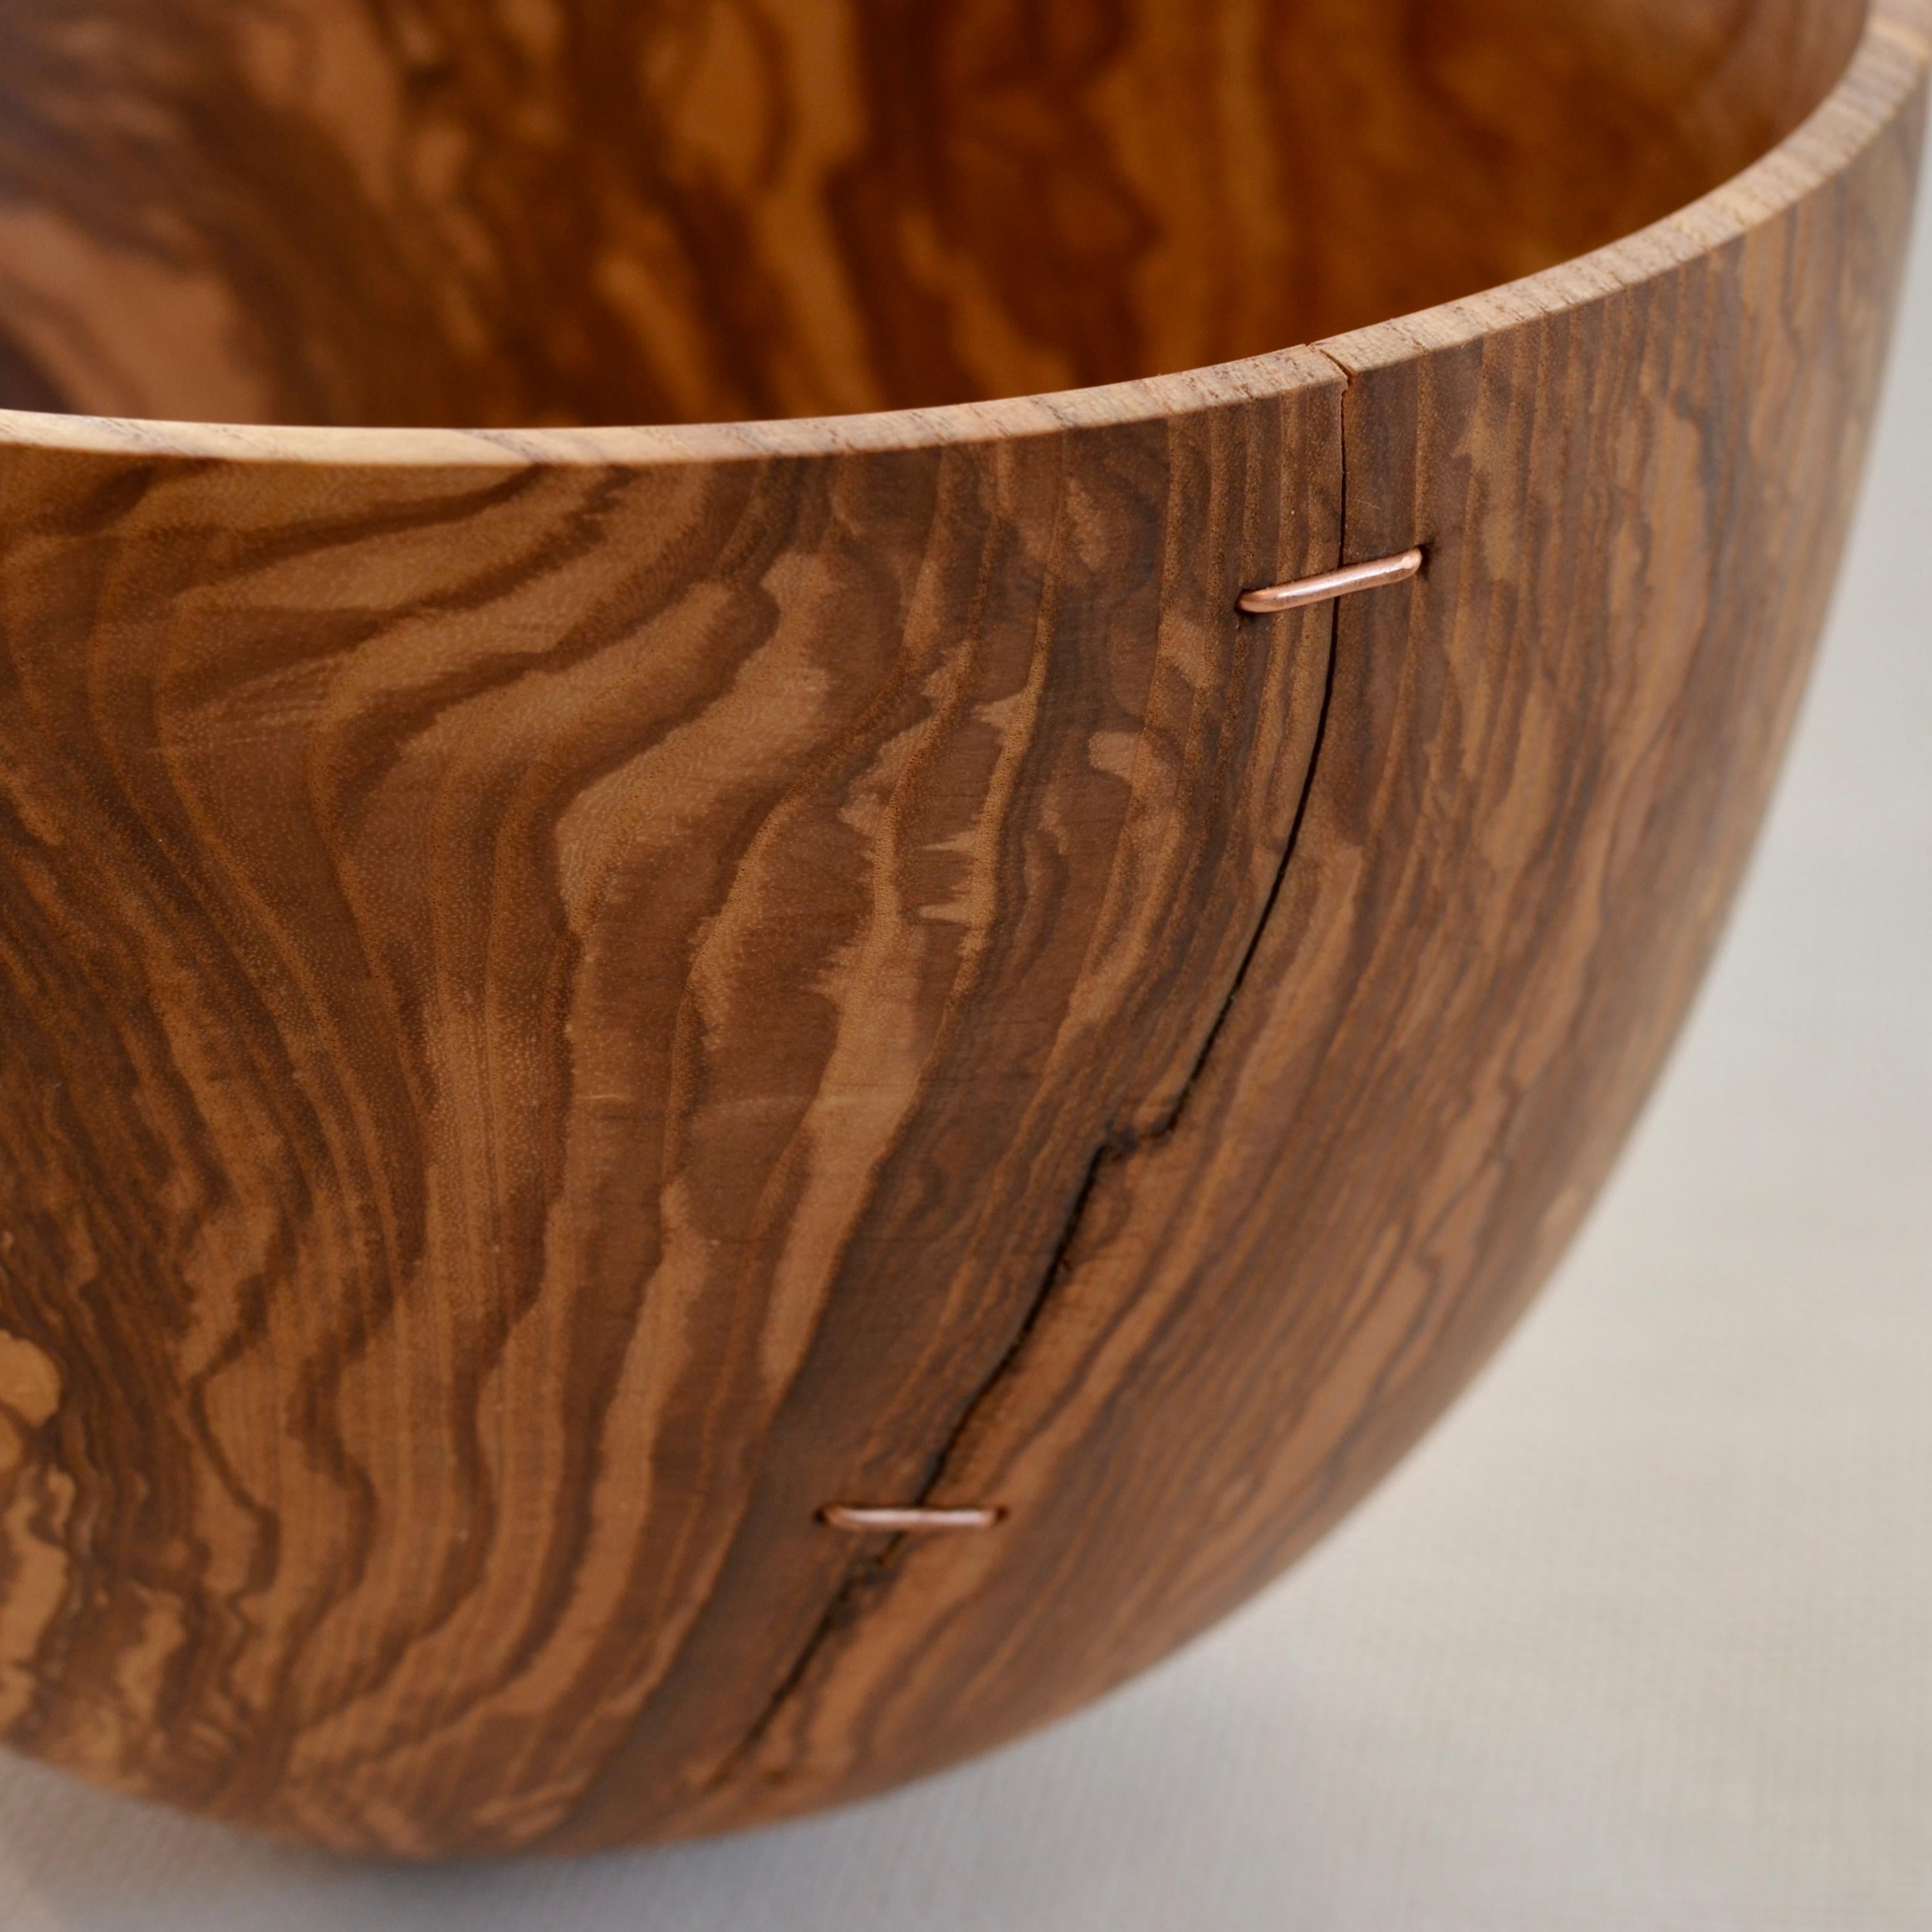 Hand-carved, 100-year-old Green Ash oiled wood bowl with copper staples. Created using wood only from fallen Ash trees. One of a kind.